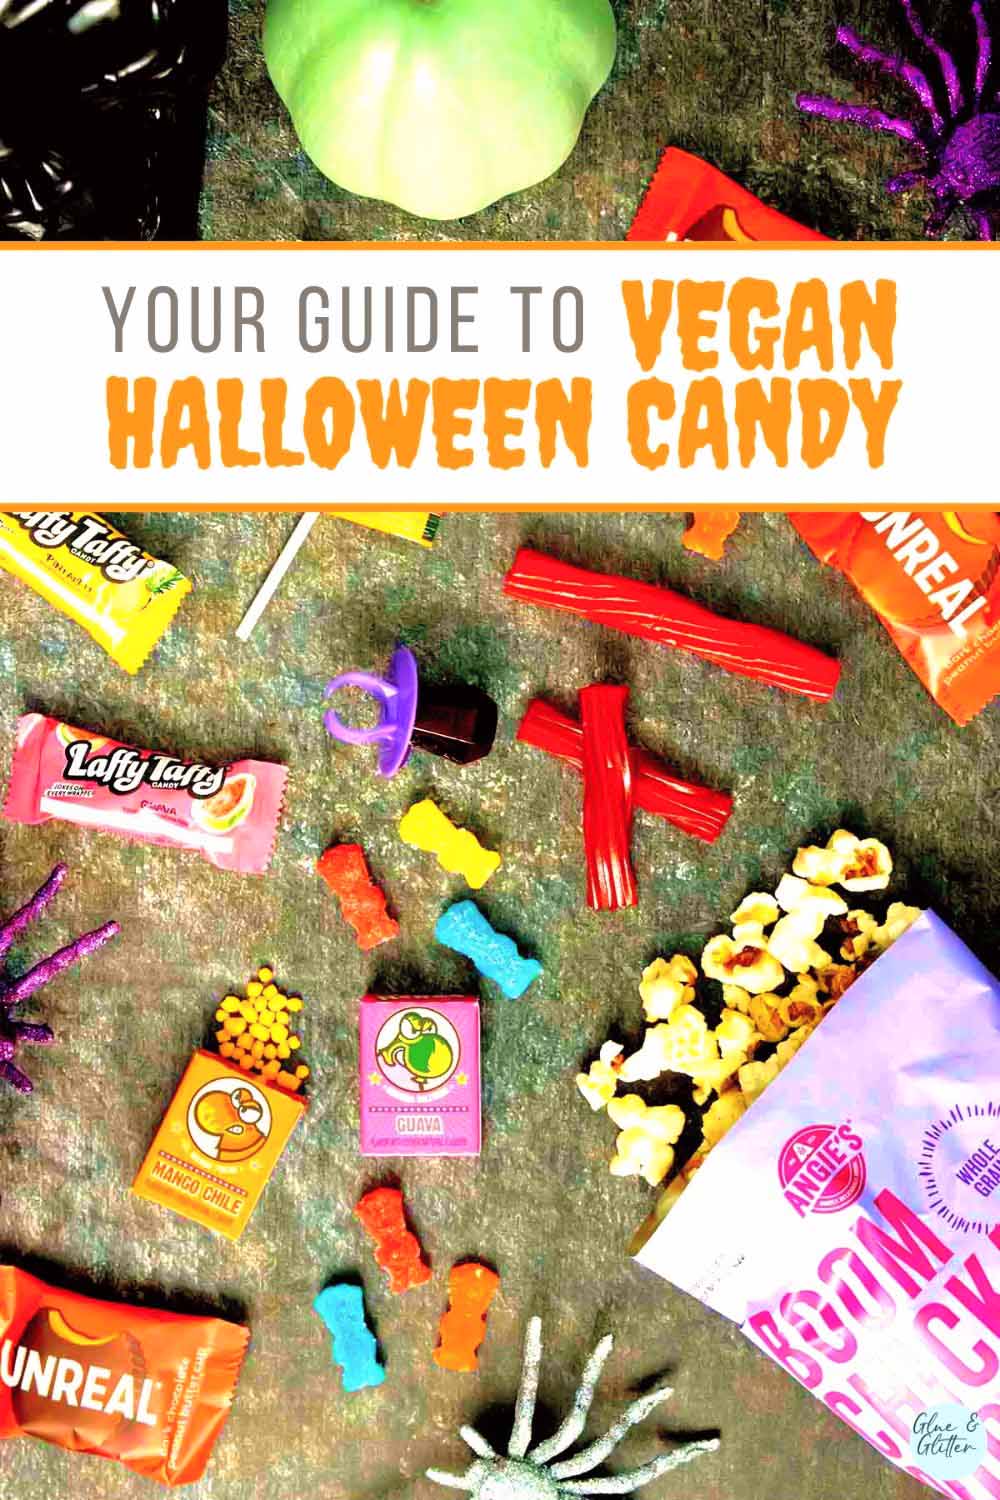 over-saturated image of vegan Halloween candy on a slate table with text that reads. "Your Guide to Vegan Halloween Candy"